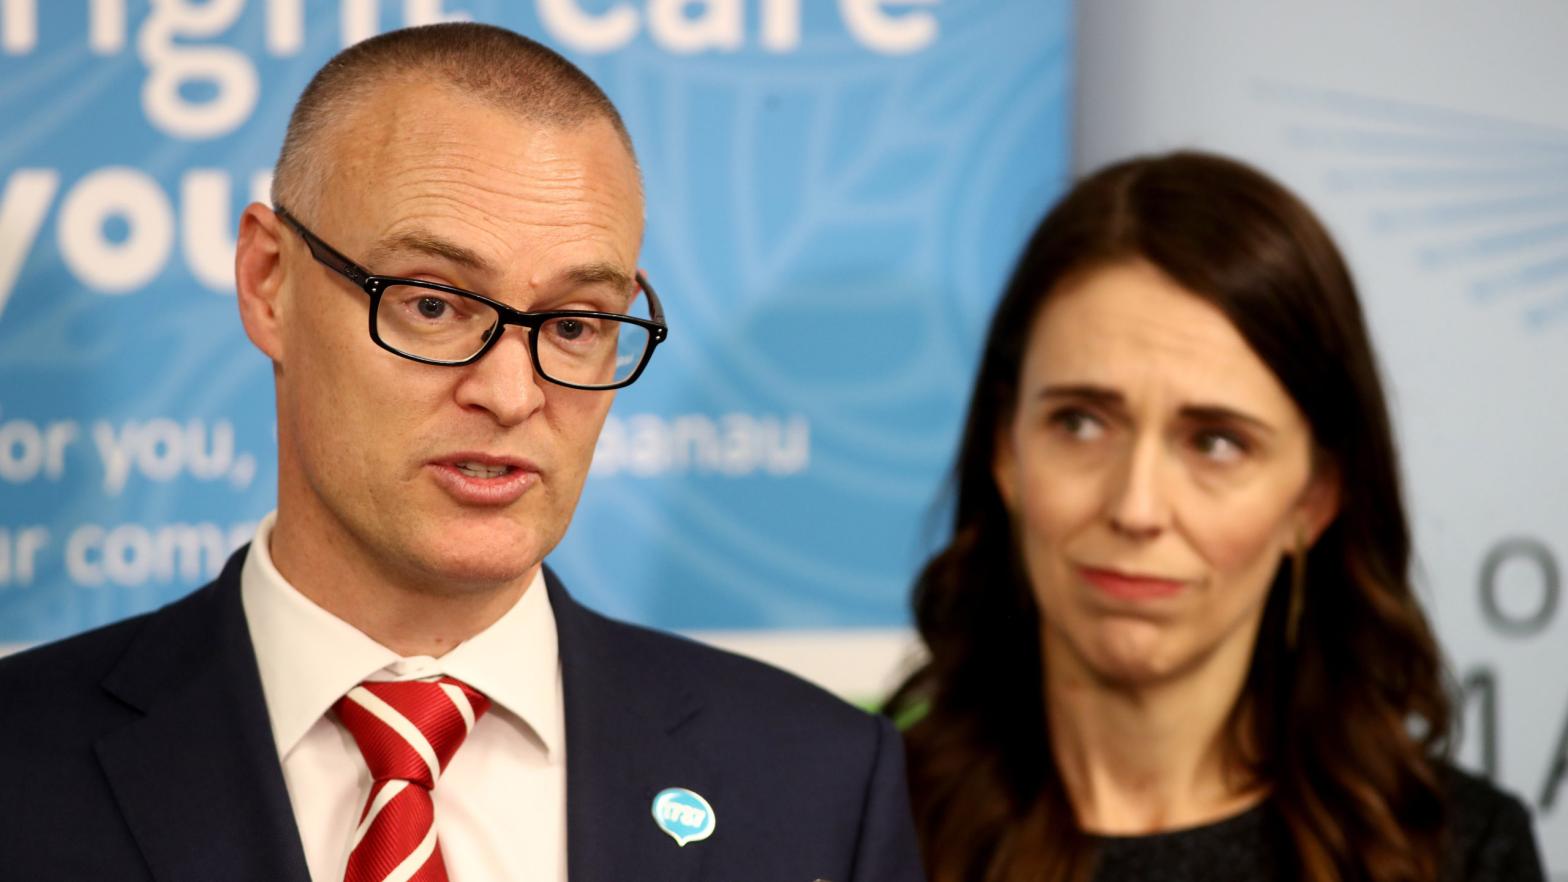 New Zealand Health Minister Dr. David Clark and Prime Minister Jacinda Arden in a file photo from June 11, 2020 in Auckland, New Zealand.  (Photo: Phil Walter, Getty Images)